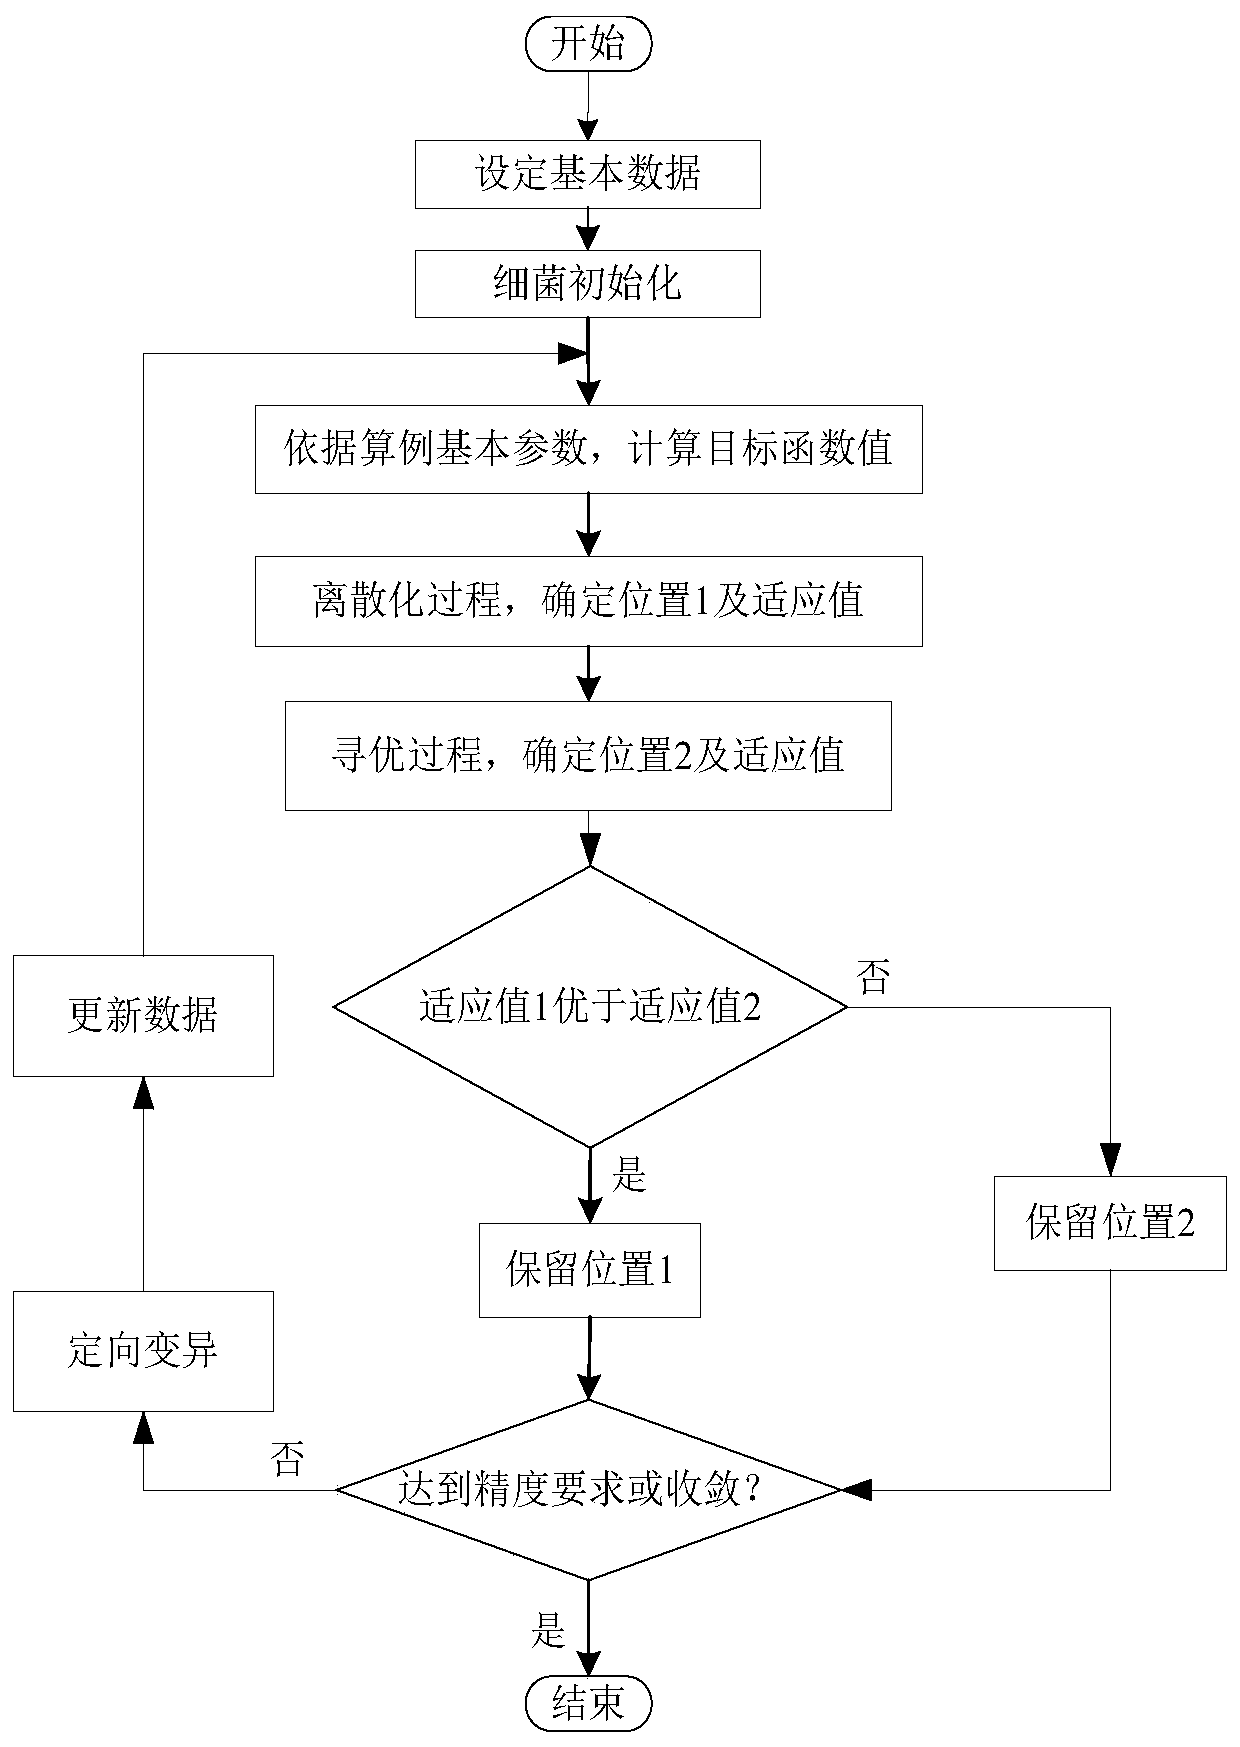 Source network load planning method for improving system security and coordination